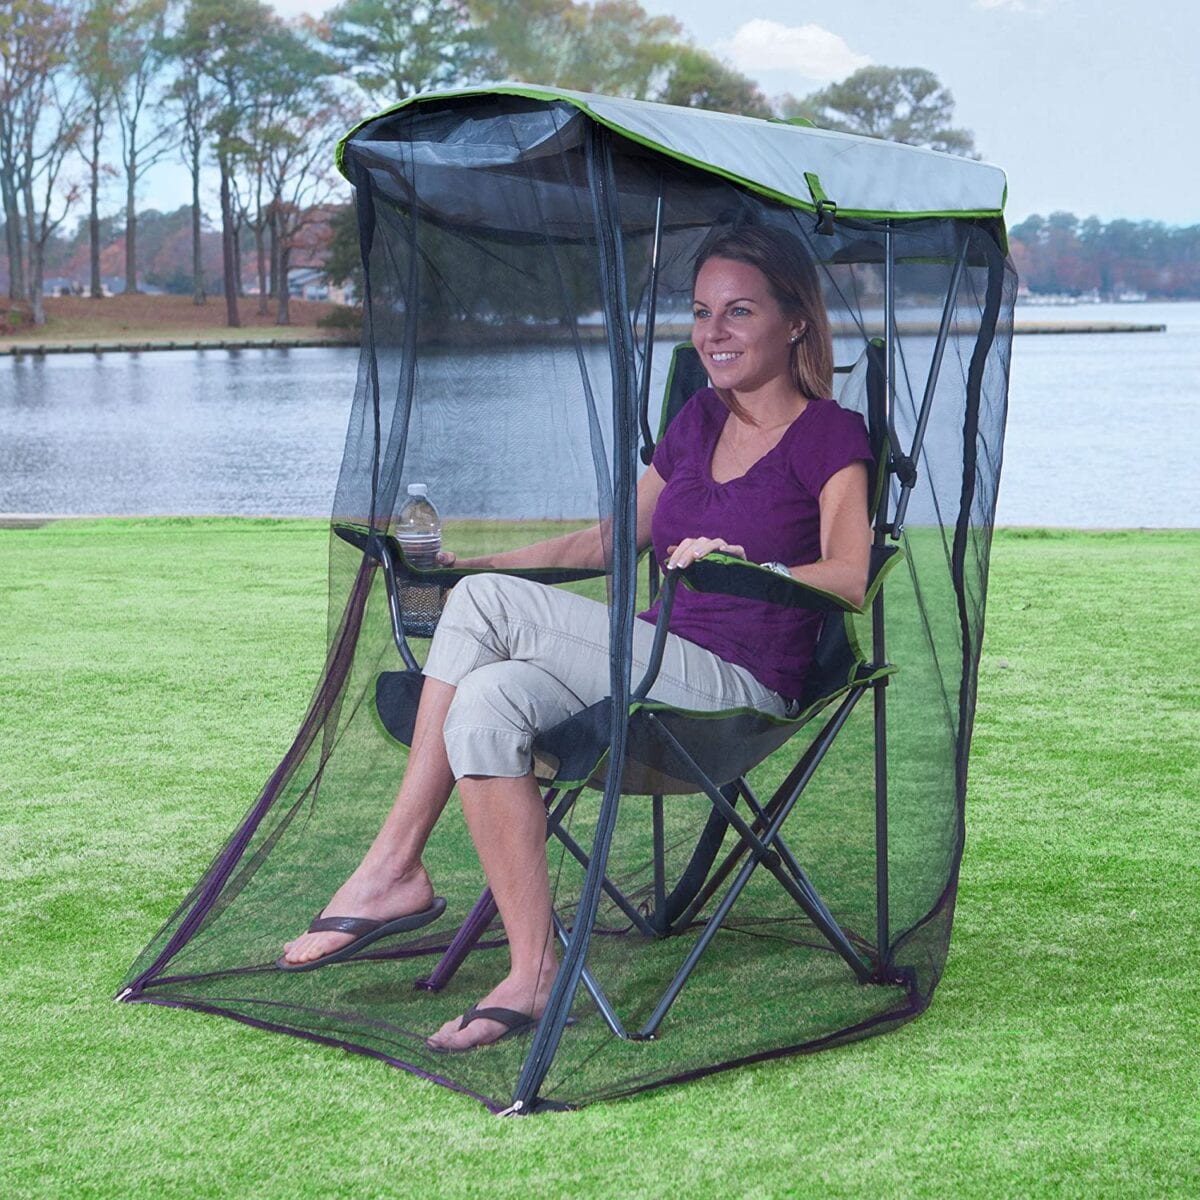 You Can Get A Folding Chair With A Net Attached To Keep The Bugs Away